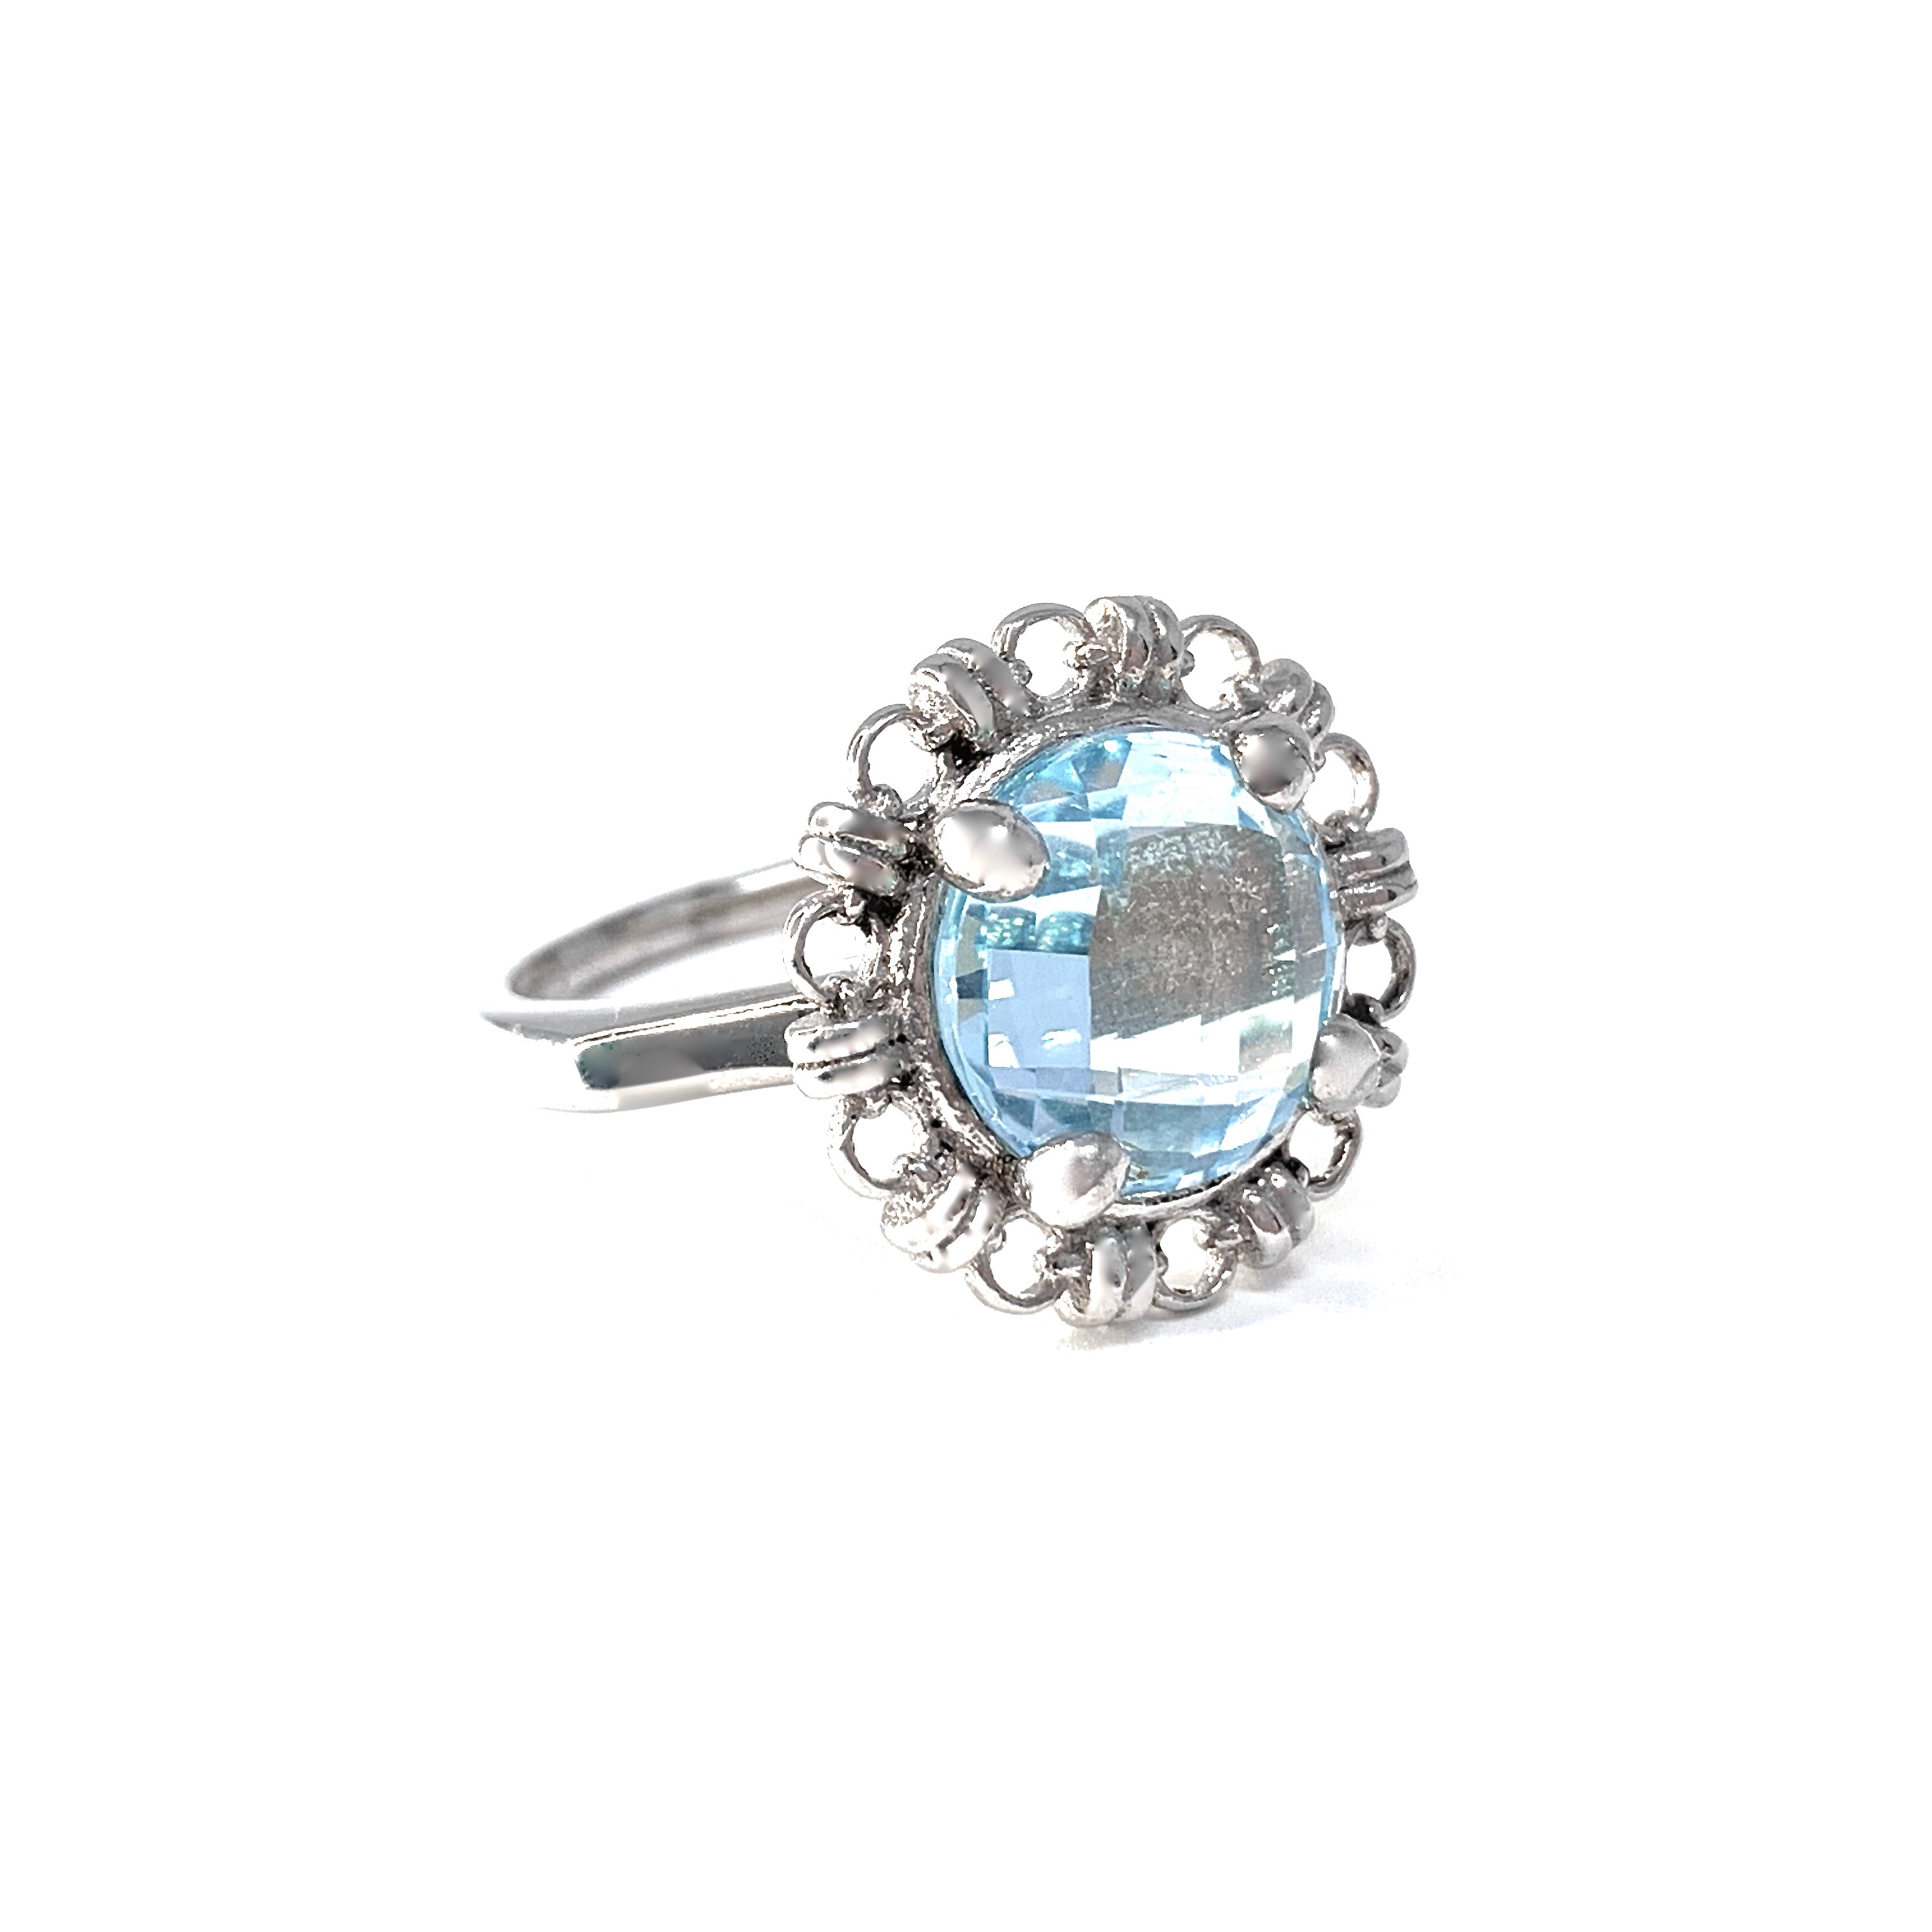 Filary Ring in Silver with Blue Topaz